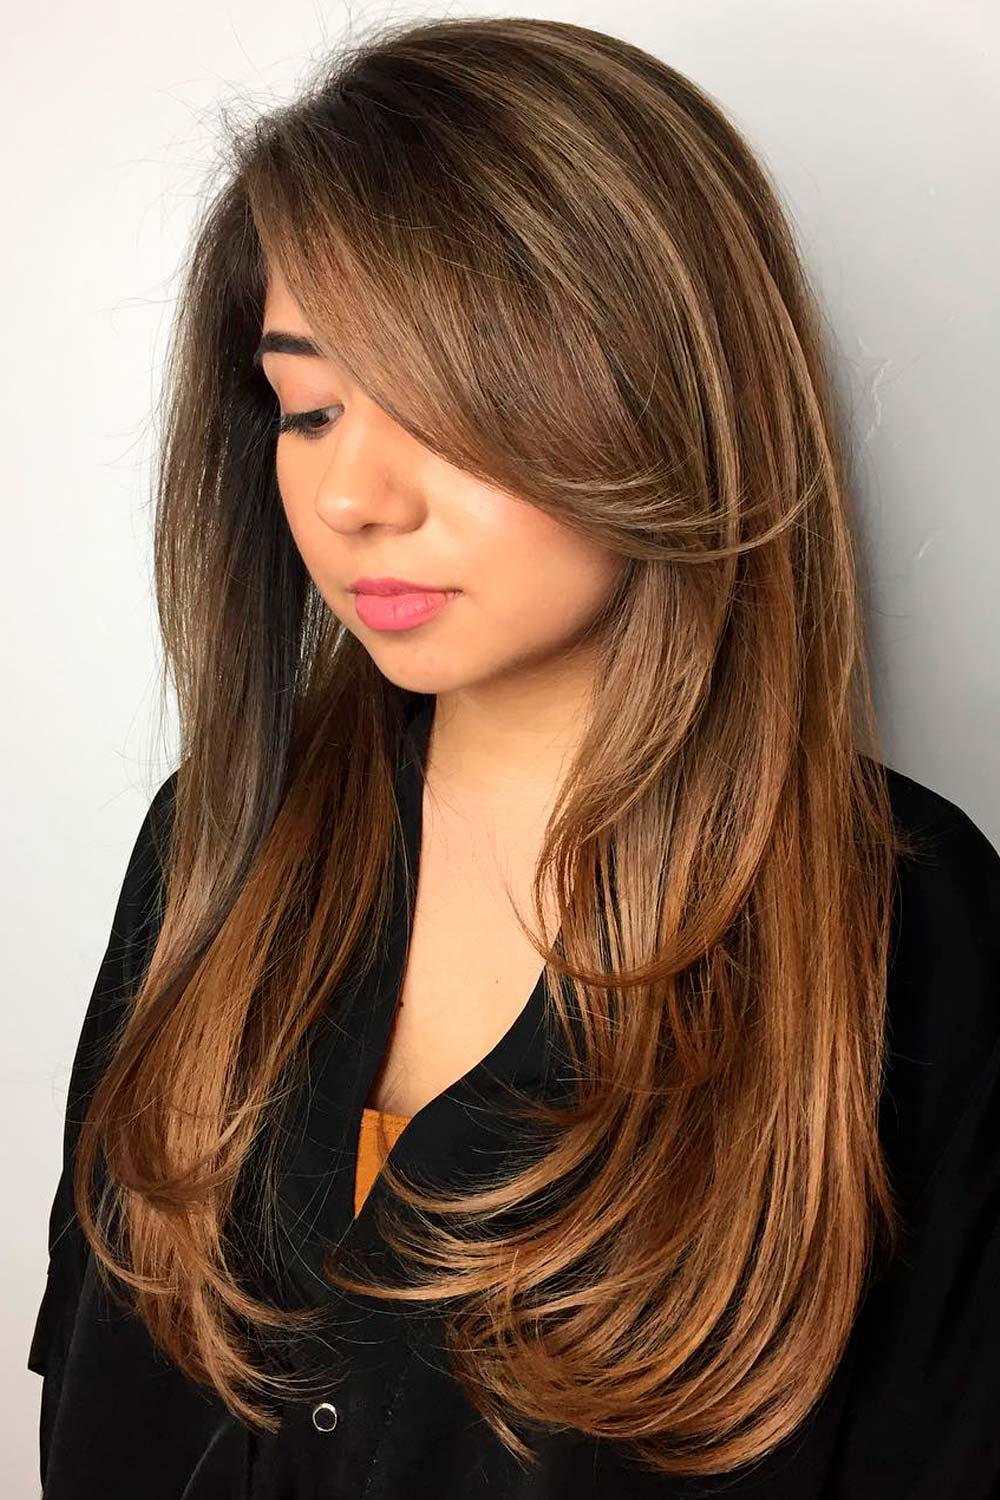 This is one of the popular types of bangs that are swept to the side and covers a certain side of the face